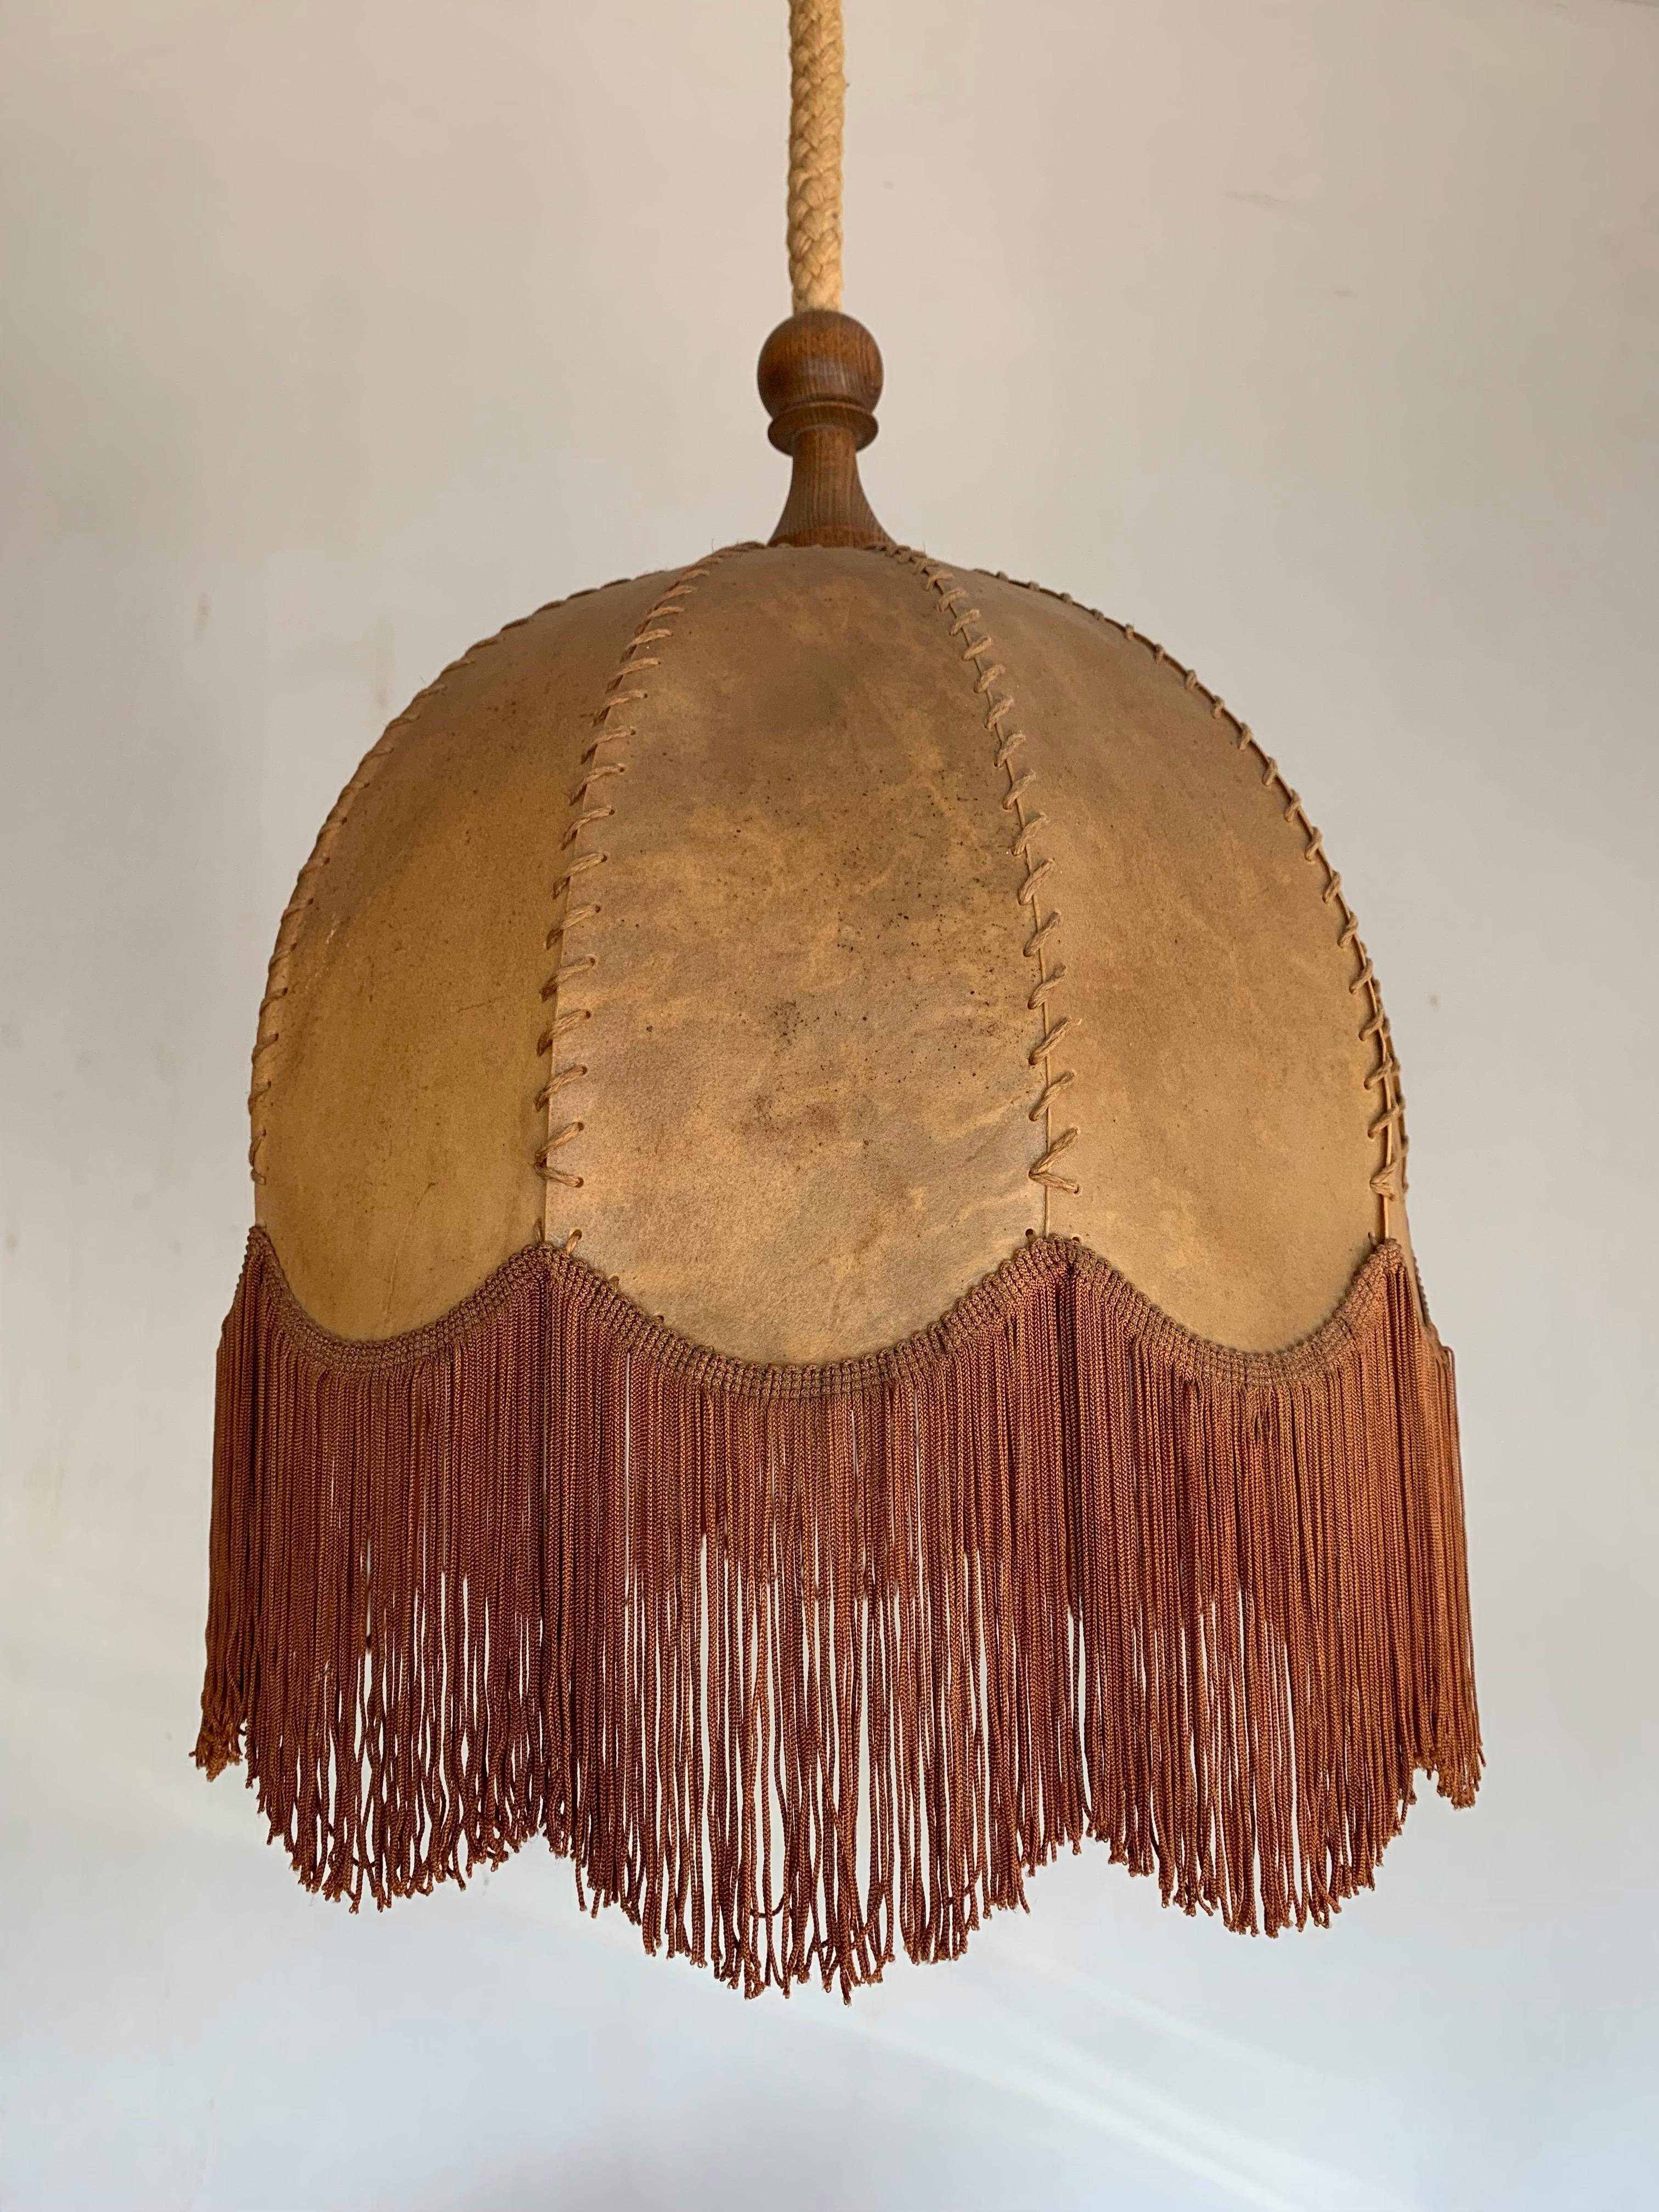 Dutch Good Looking Home Design Leather, Fringes, Wood and Rope Pendant Light, 1930s